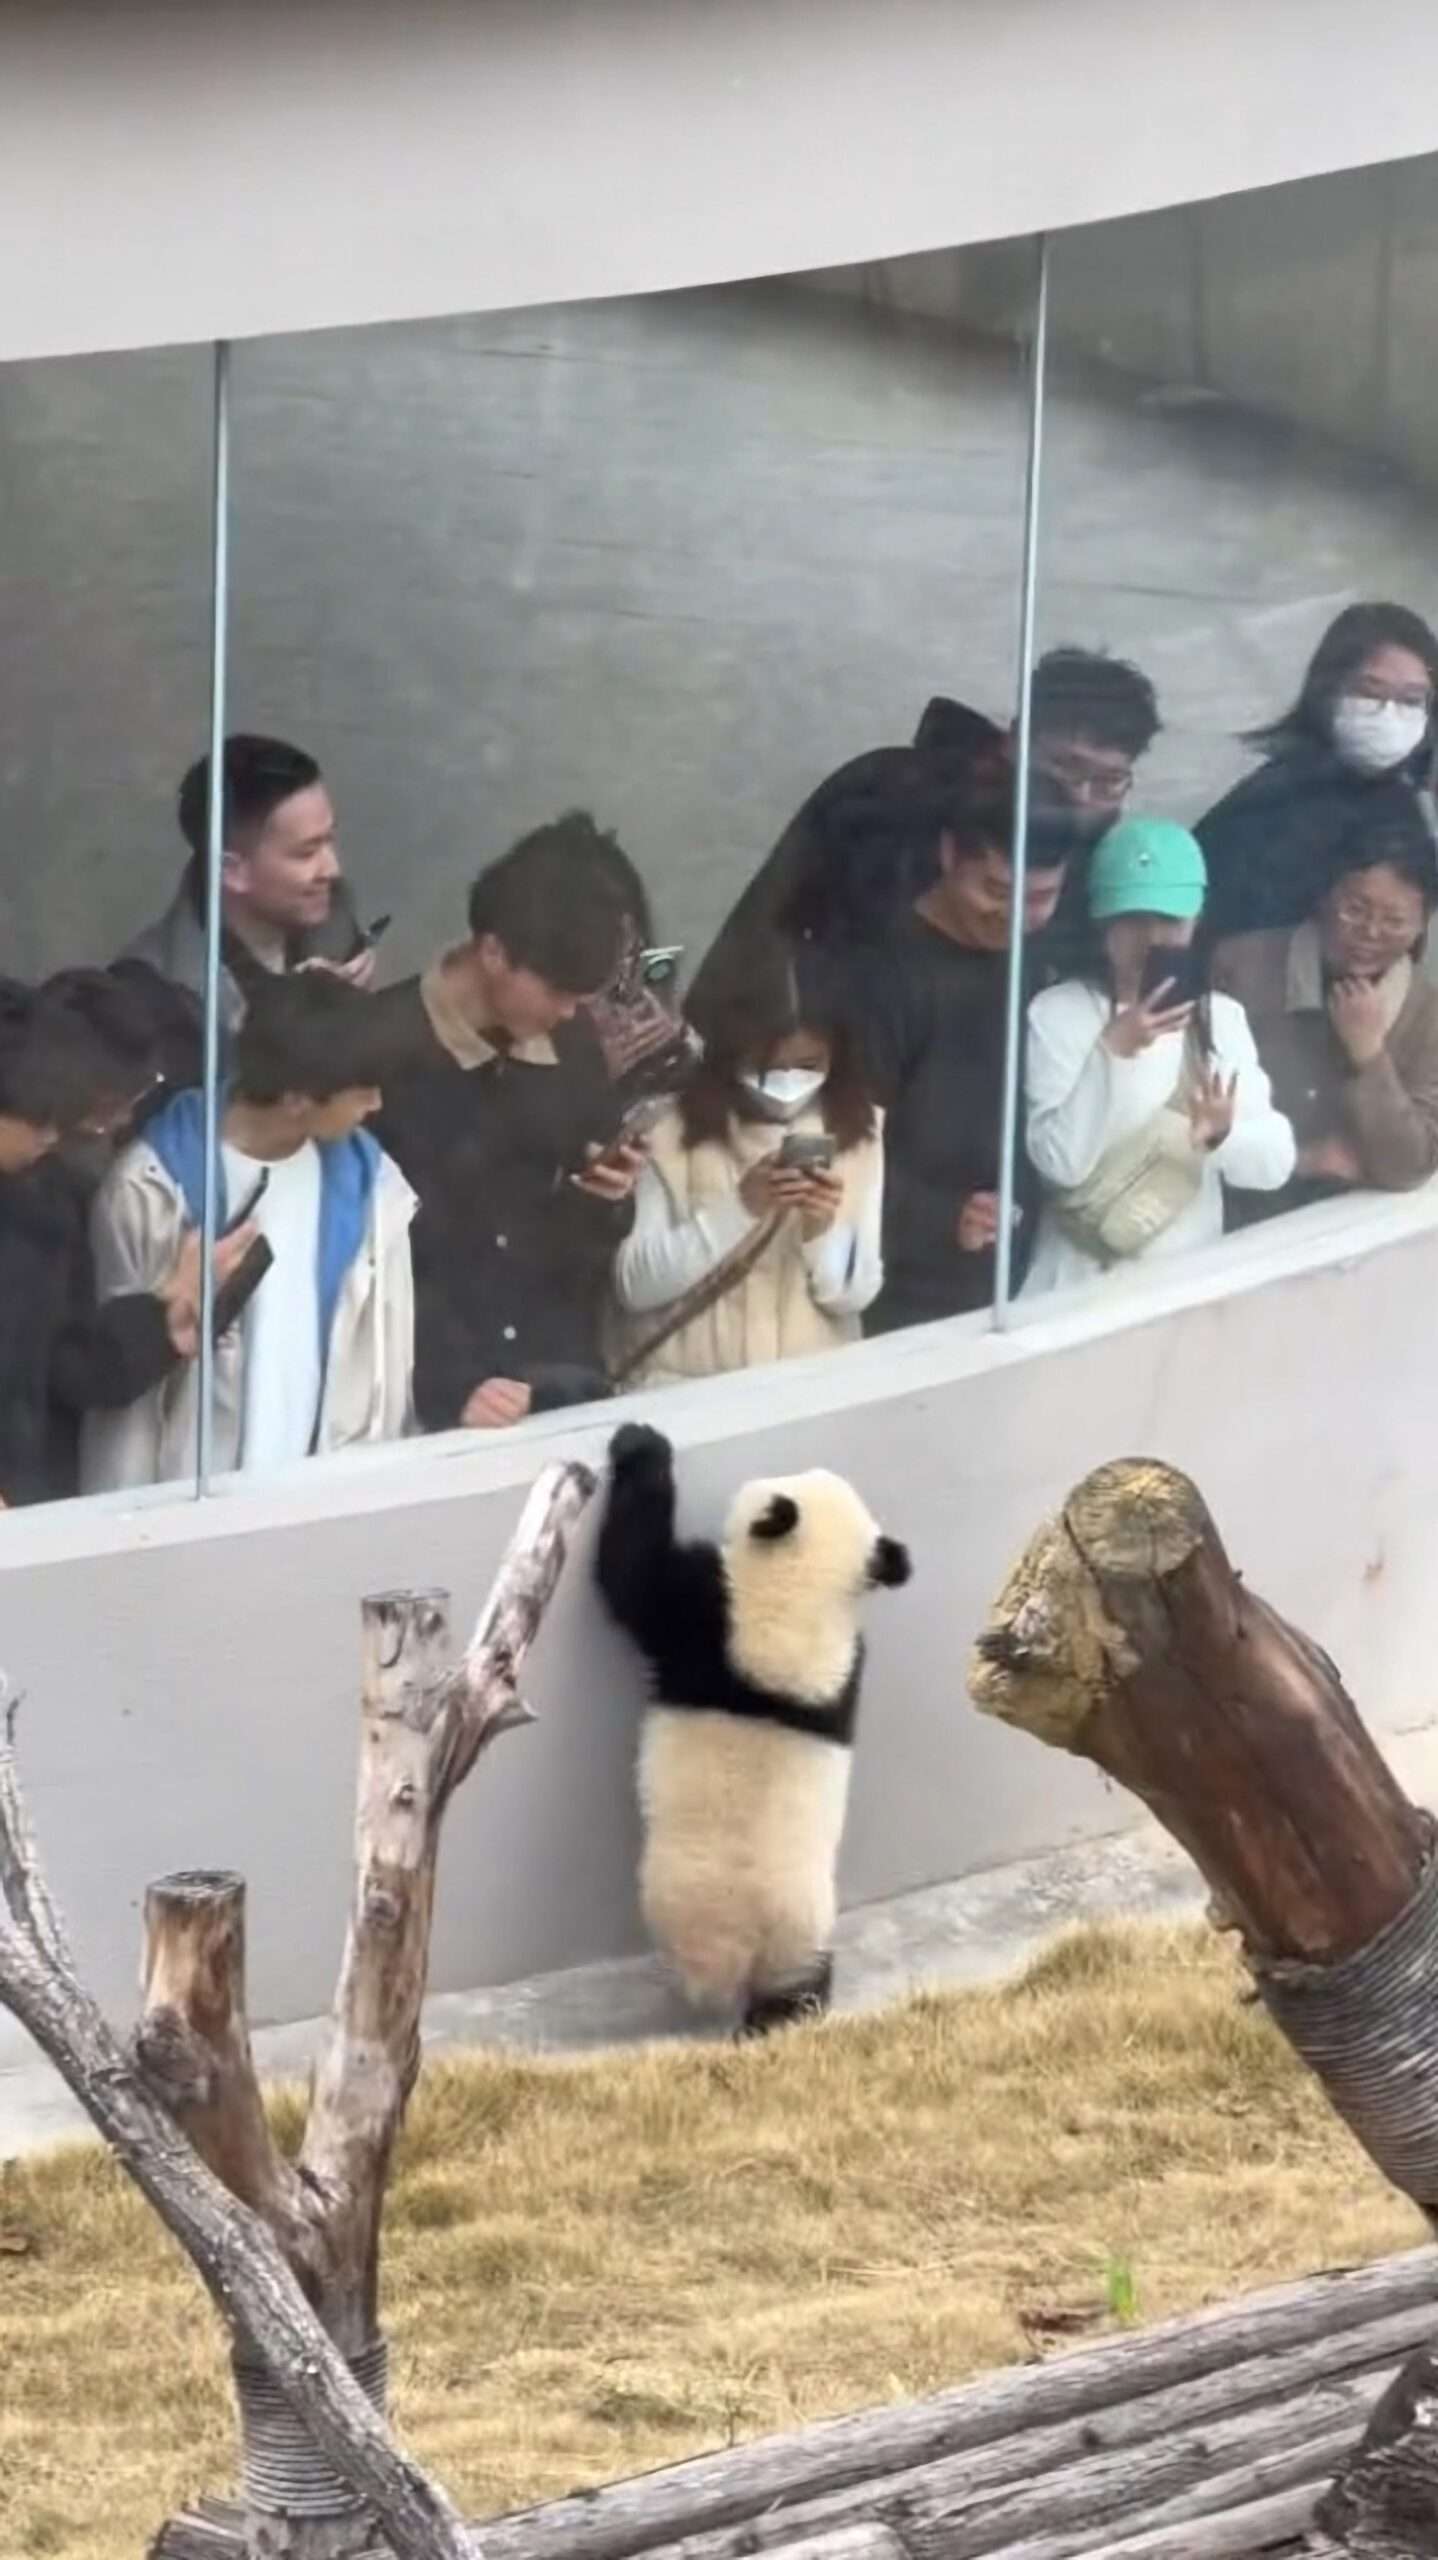 Read more about the article Viral Moment Panda Cub Goes Around On Hind Legs Greeting Queueing Zoo Visitors